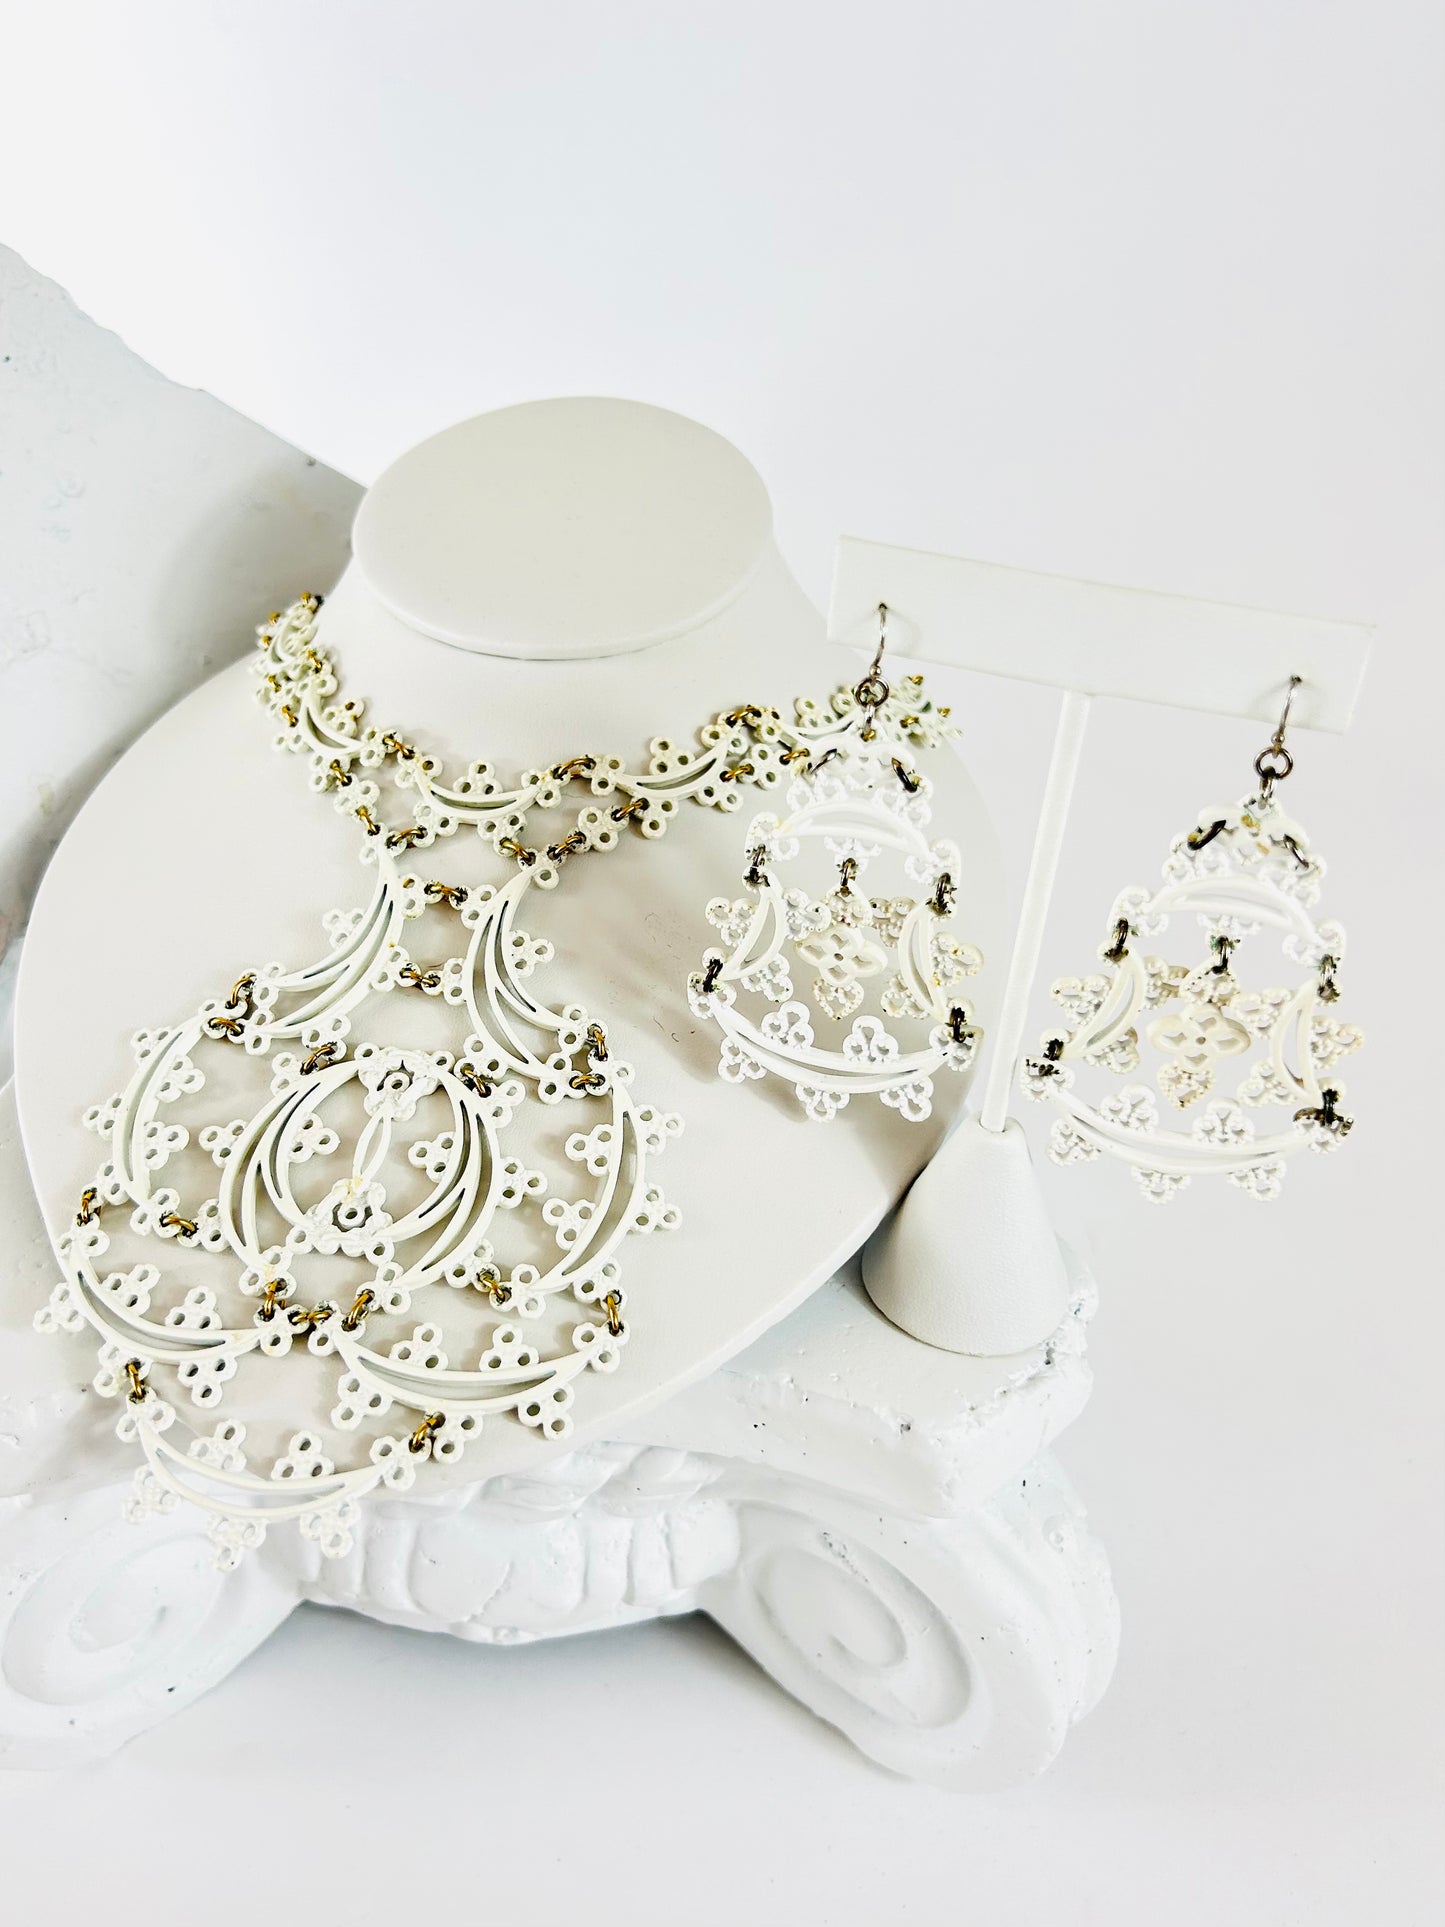 Vintage Necklace and Earring Set